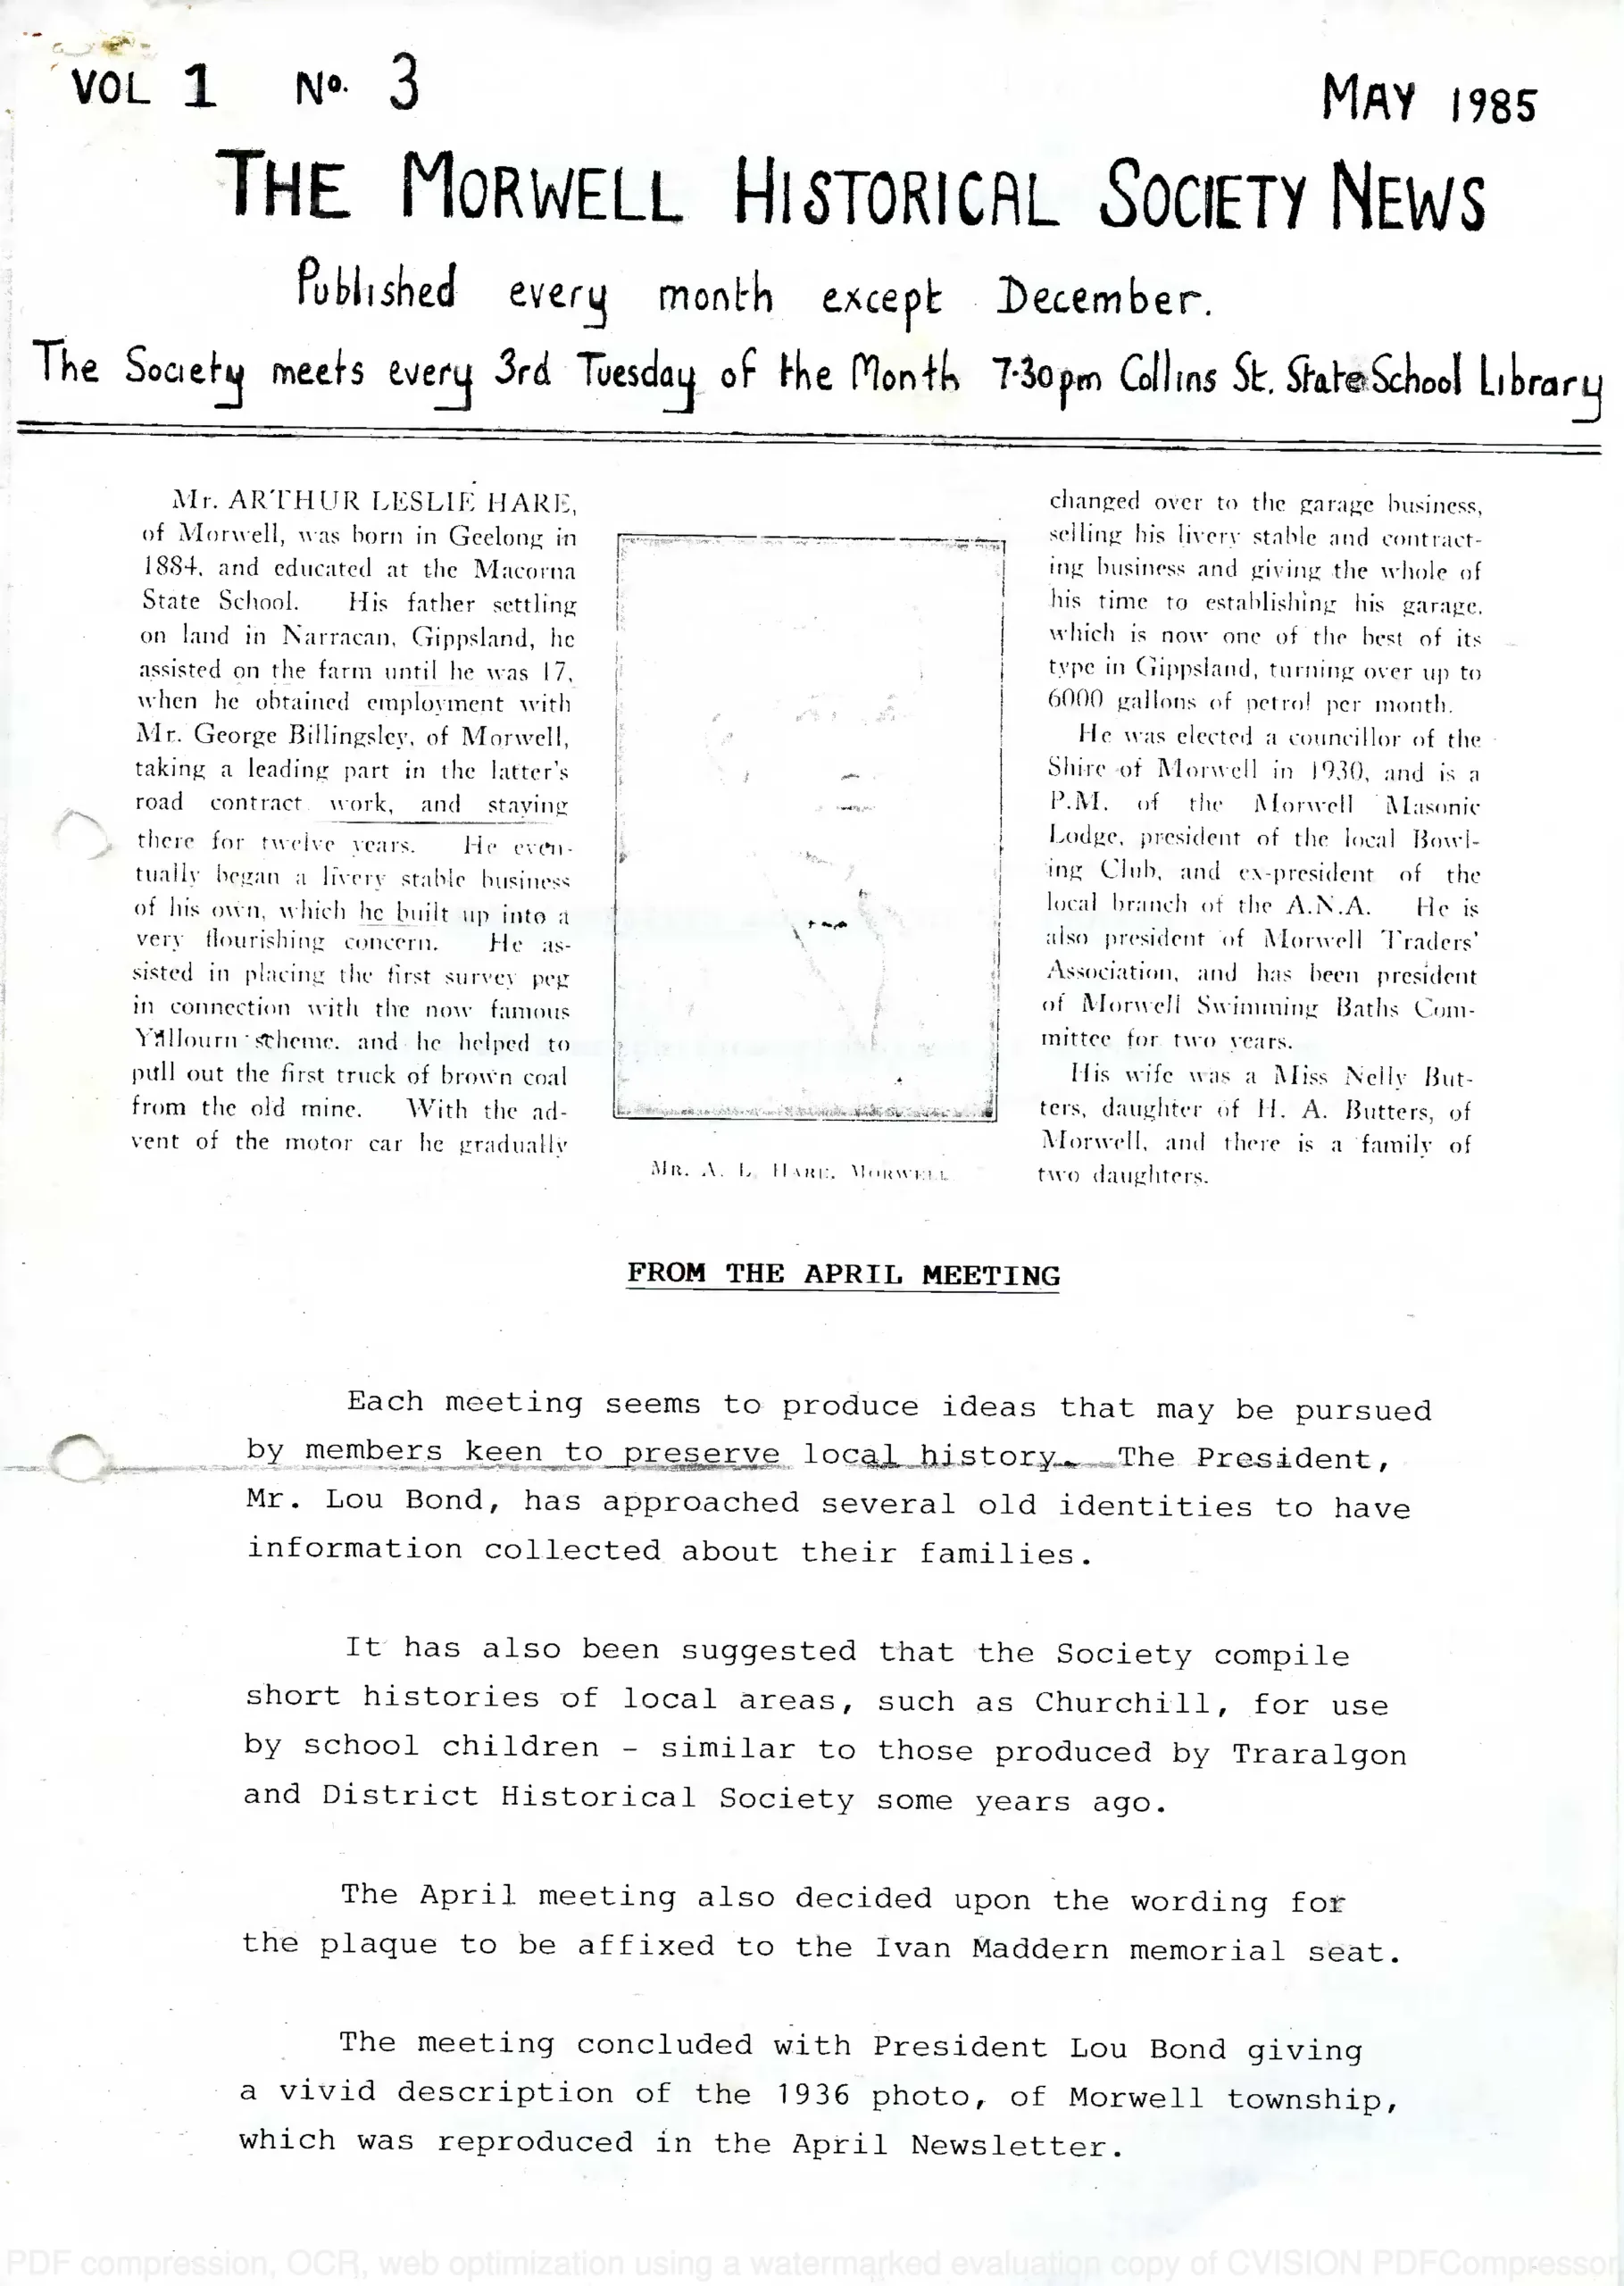 Newsletter May 1985